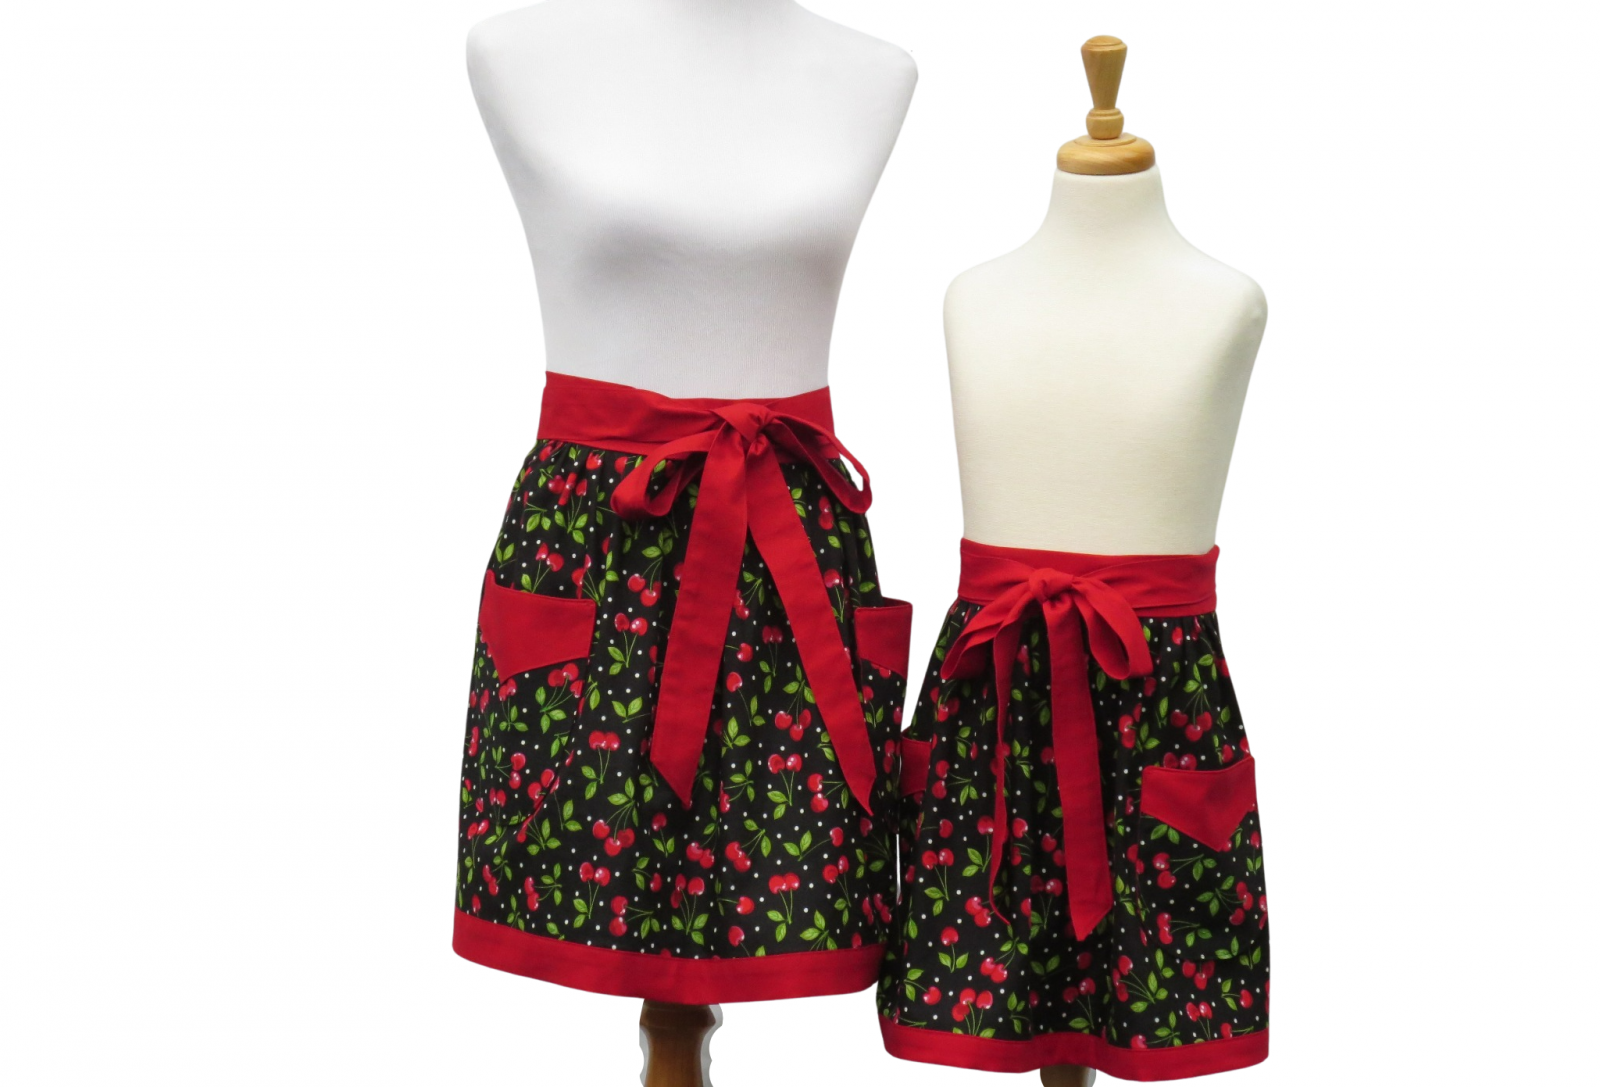 https://www.stitchedbybeverly.com/sites/stitchedbybeverly.indiemade.com/files/imagecache/im_clientsite_product_zoom/mother_daughter_matching_cherries_half_aprons.jpg